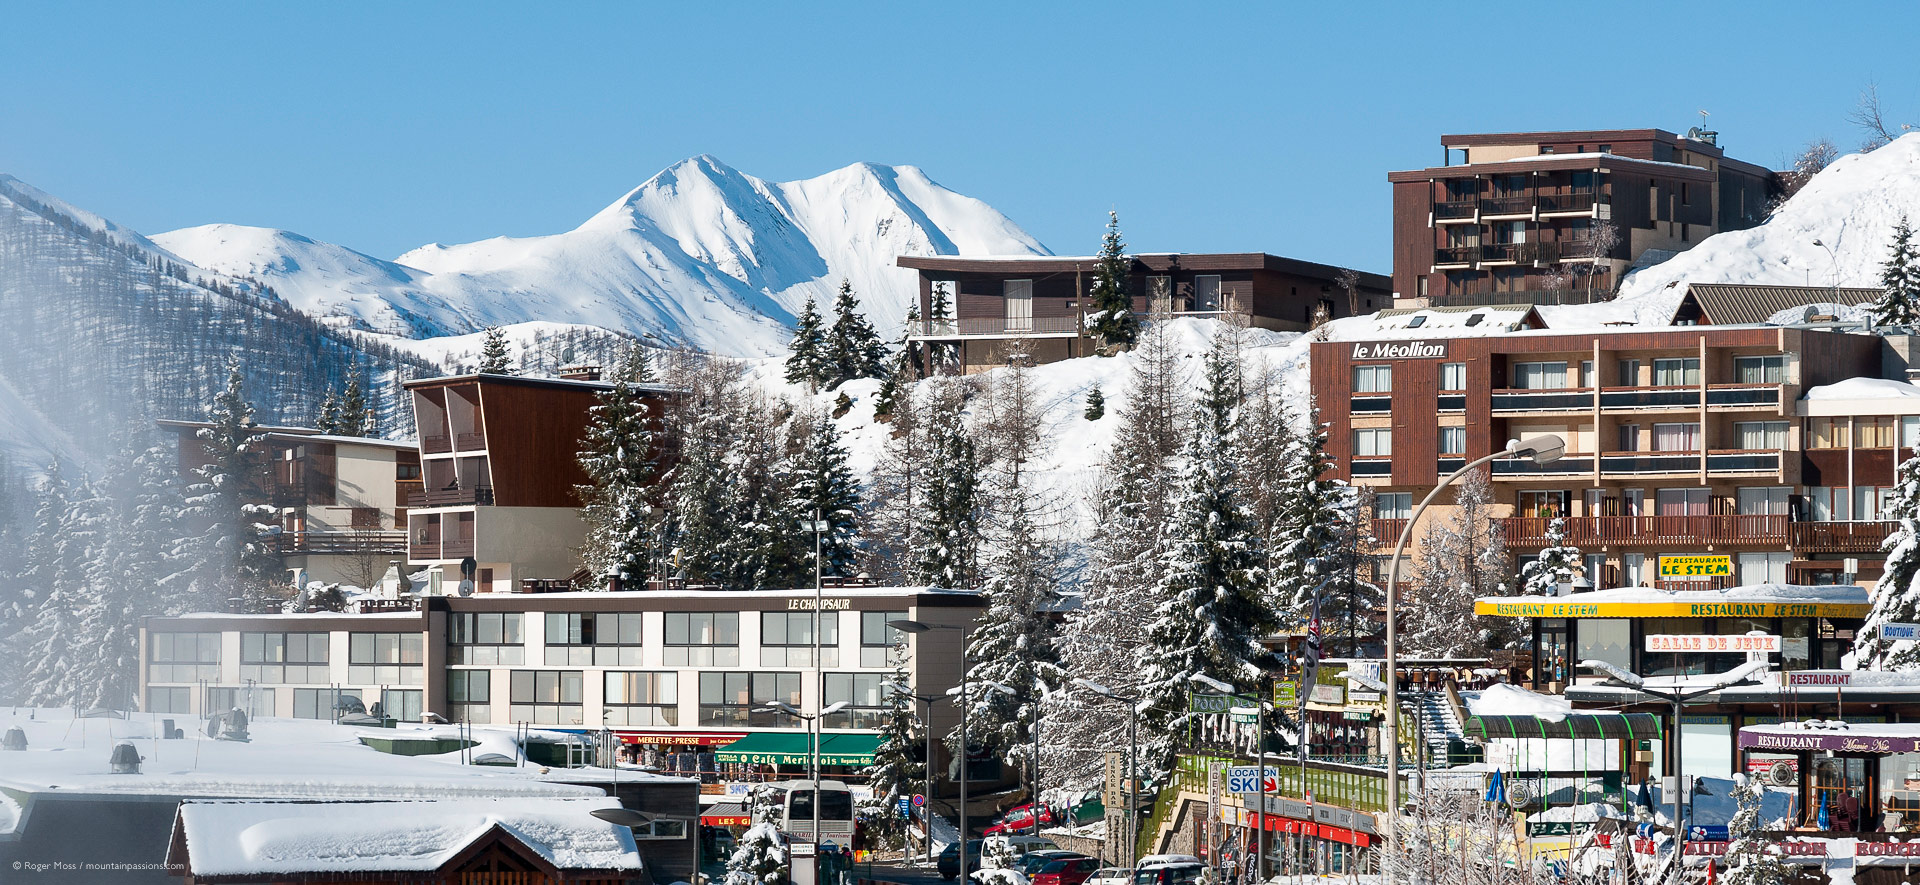 Side view of ski village with snow-covered trees and mountains